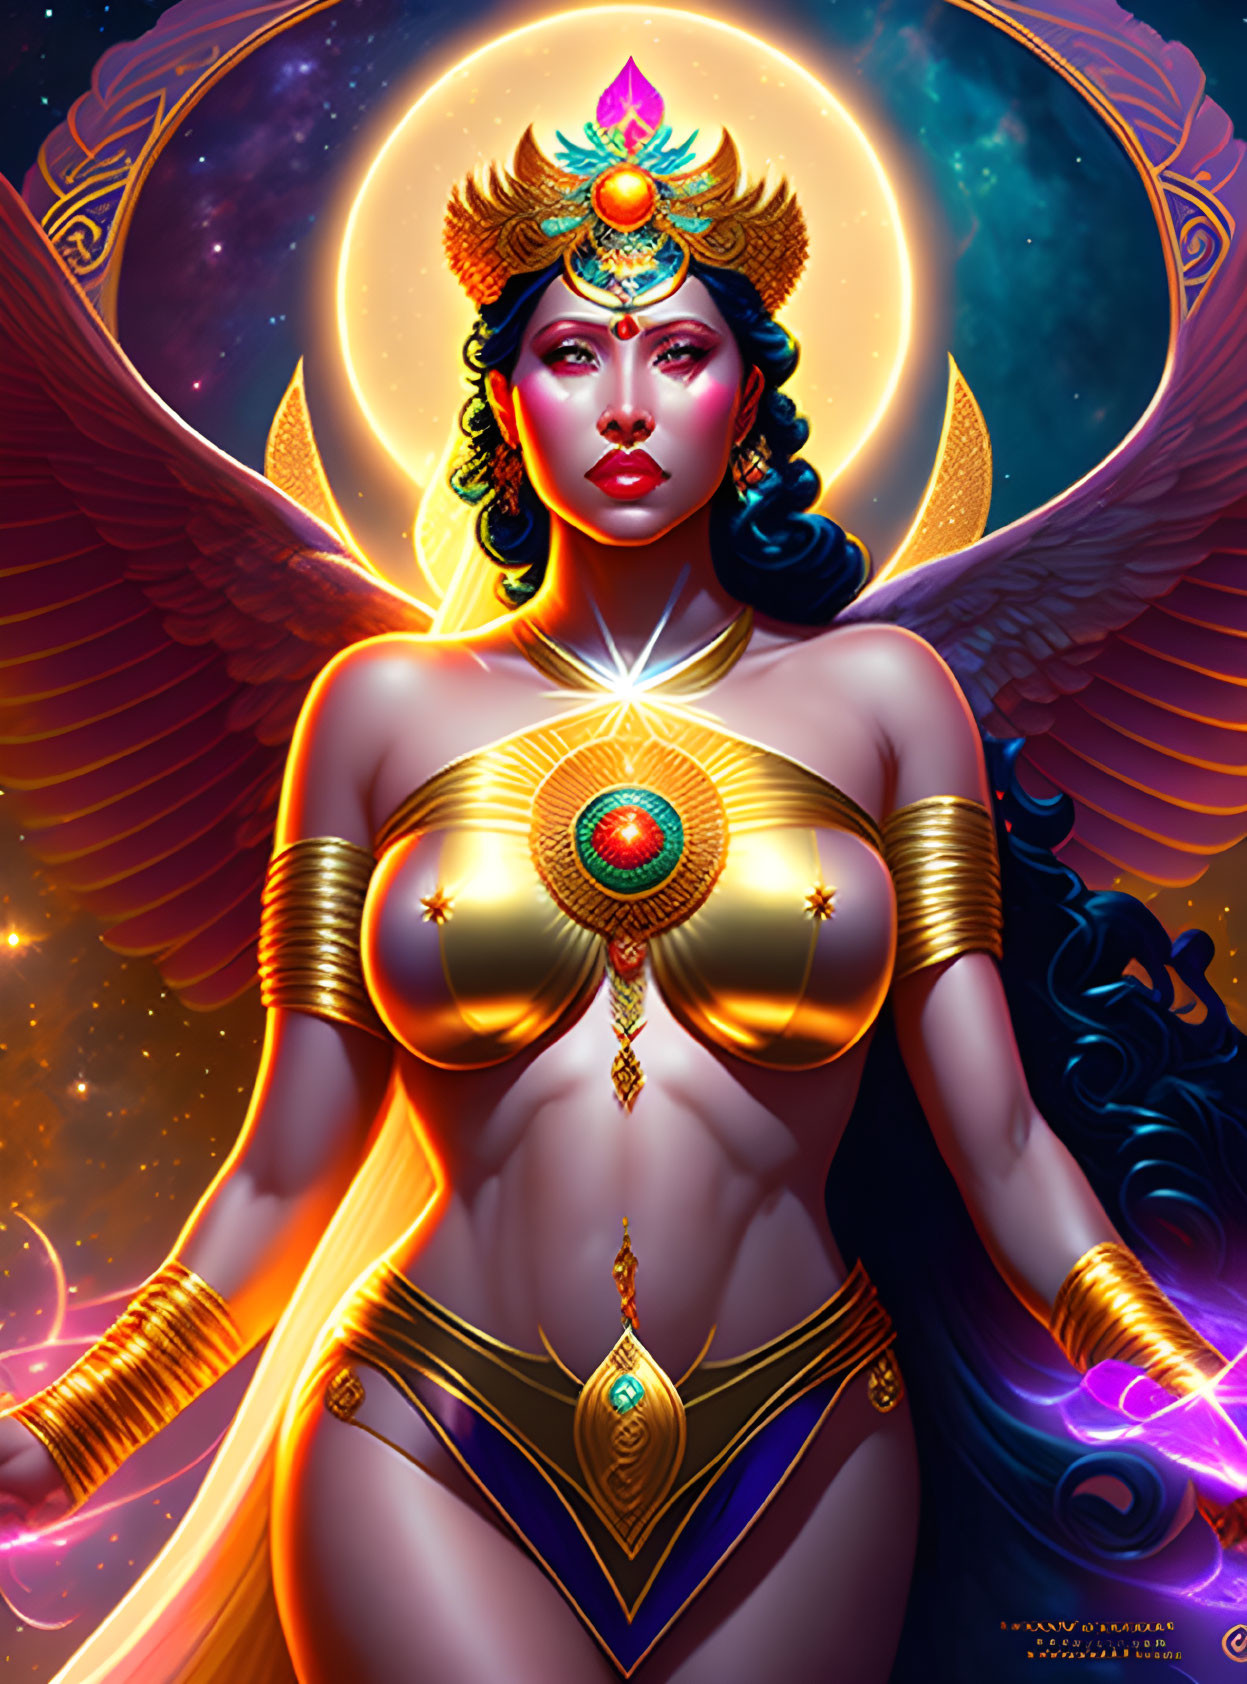 Mythological Figure with Golden Wings and Cosmic Background